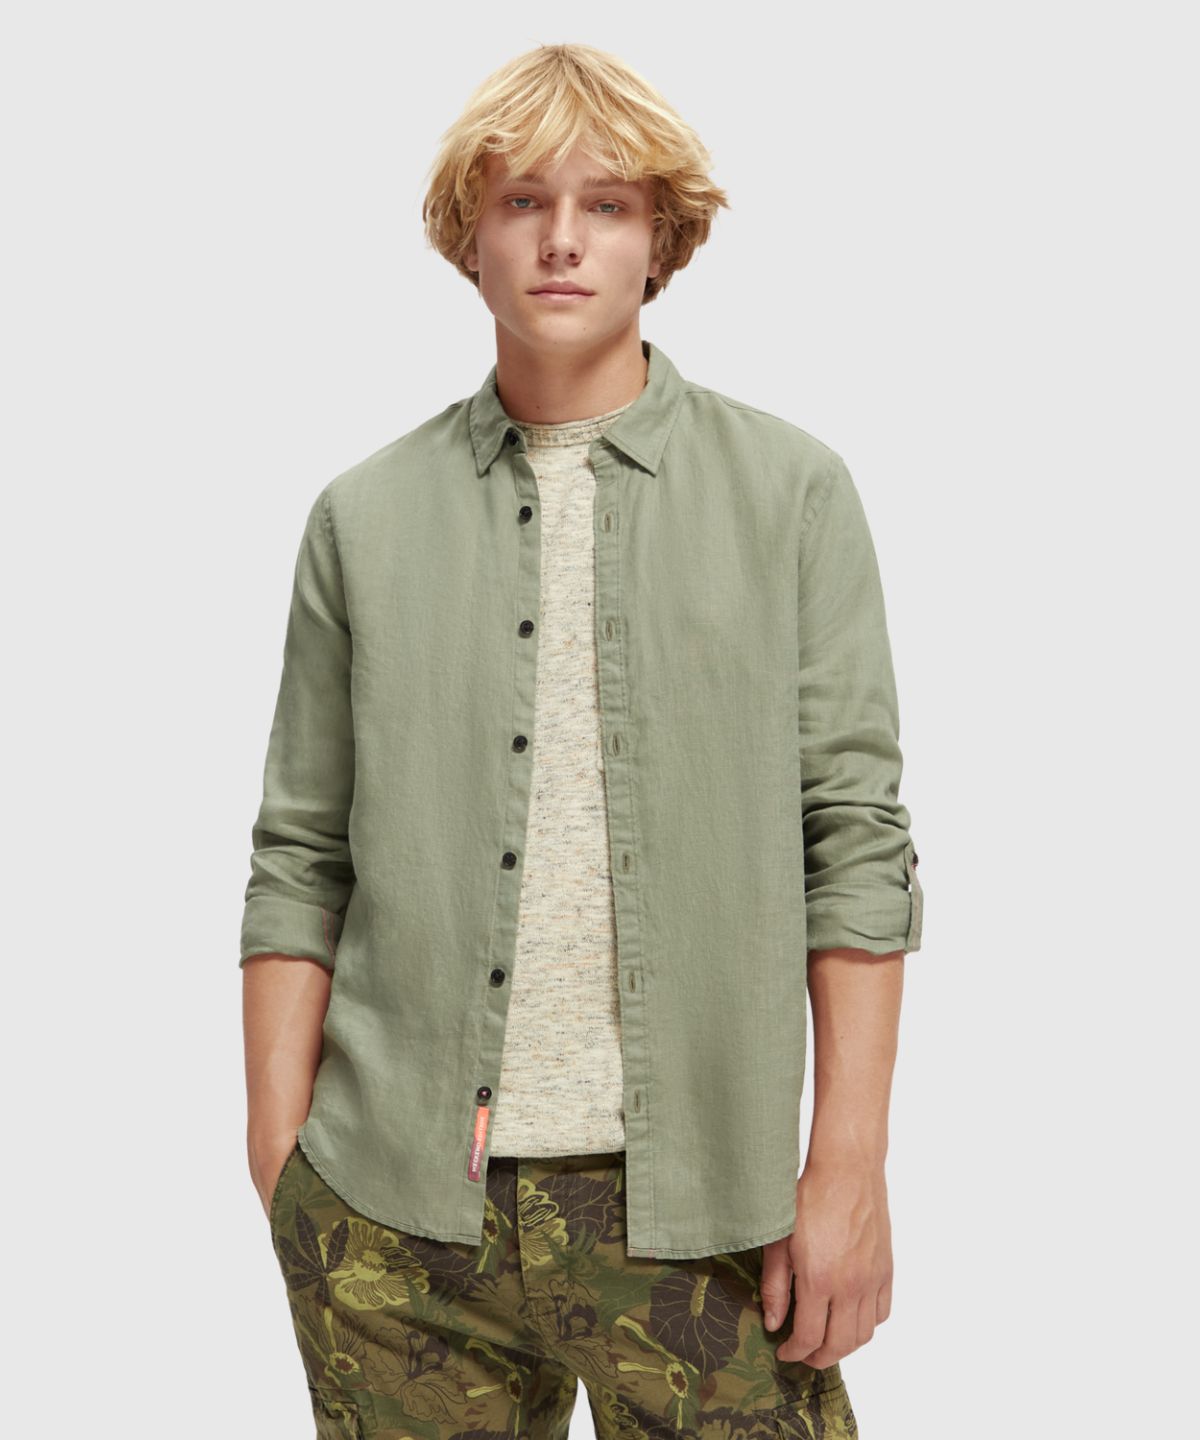 Linen shirt with sleeve roll-up - Maxx Group